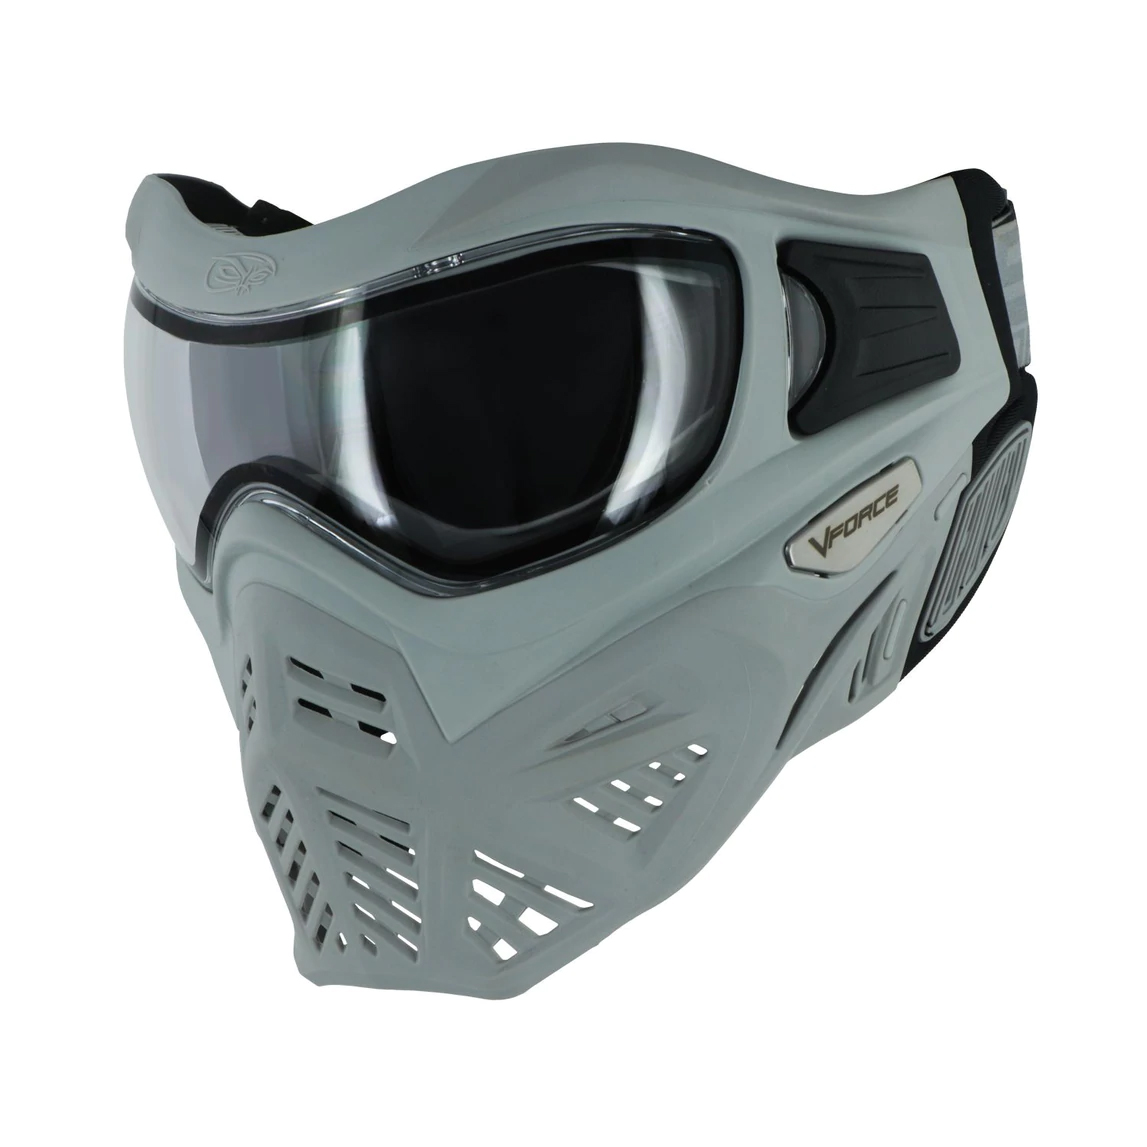 V-Force Grill 2.0 Goggle Shark